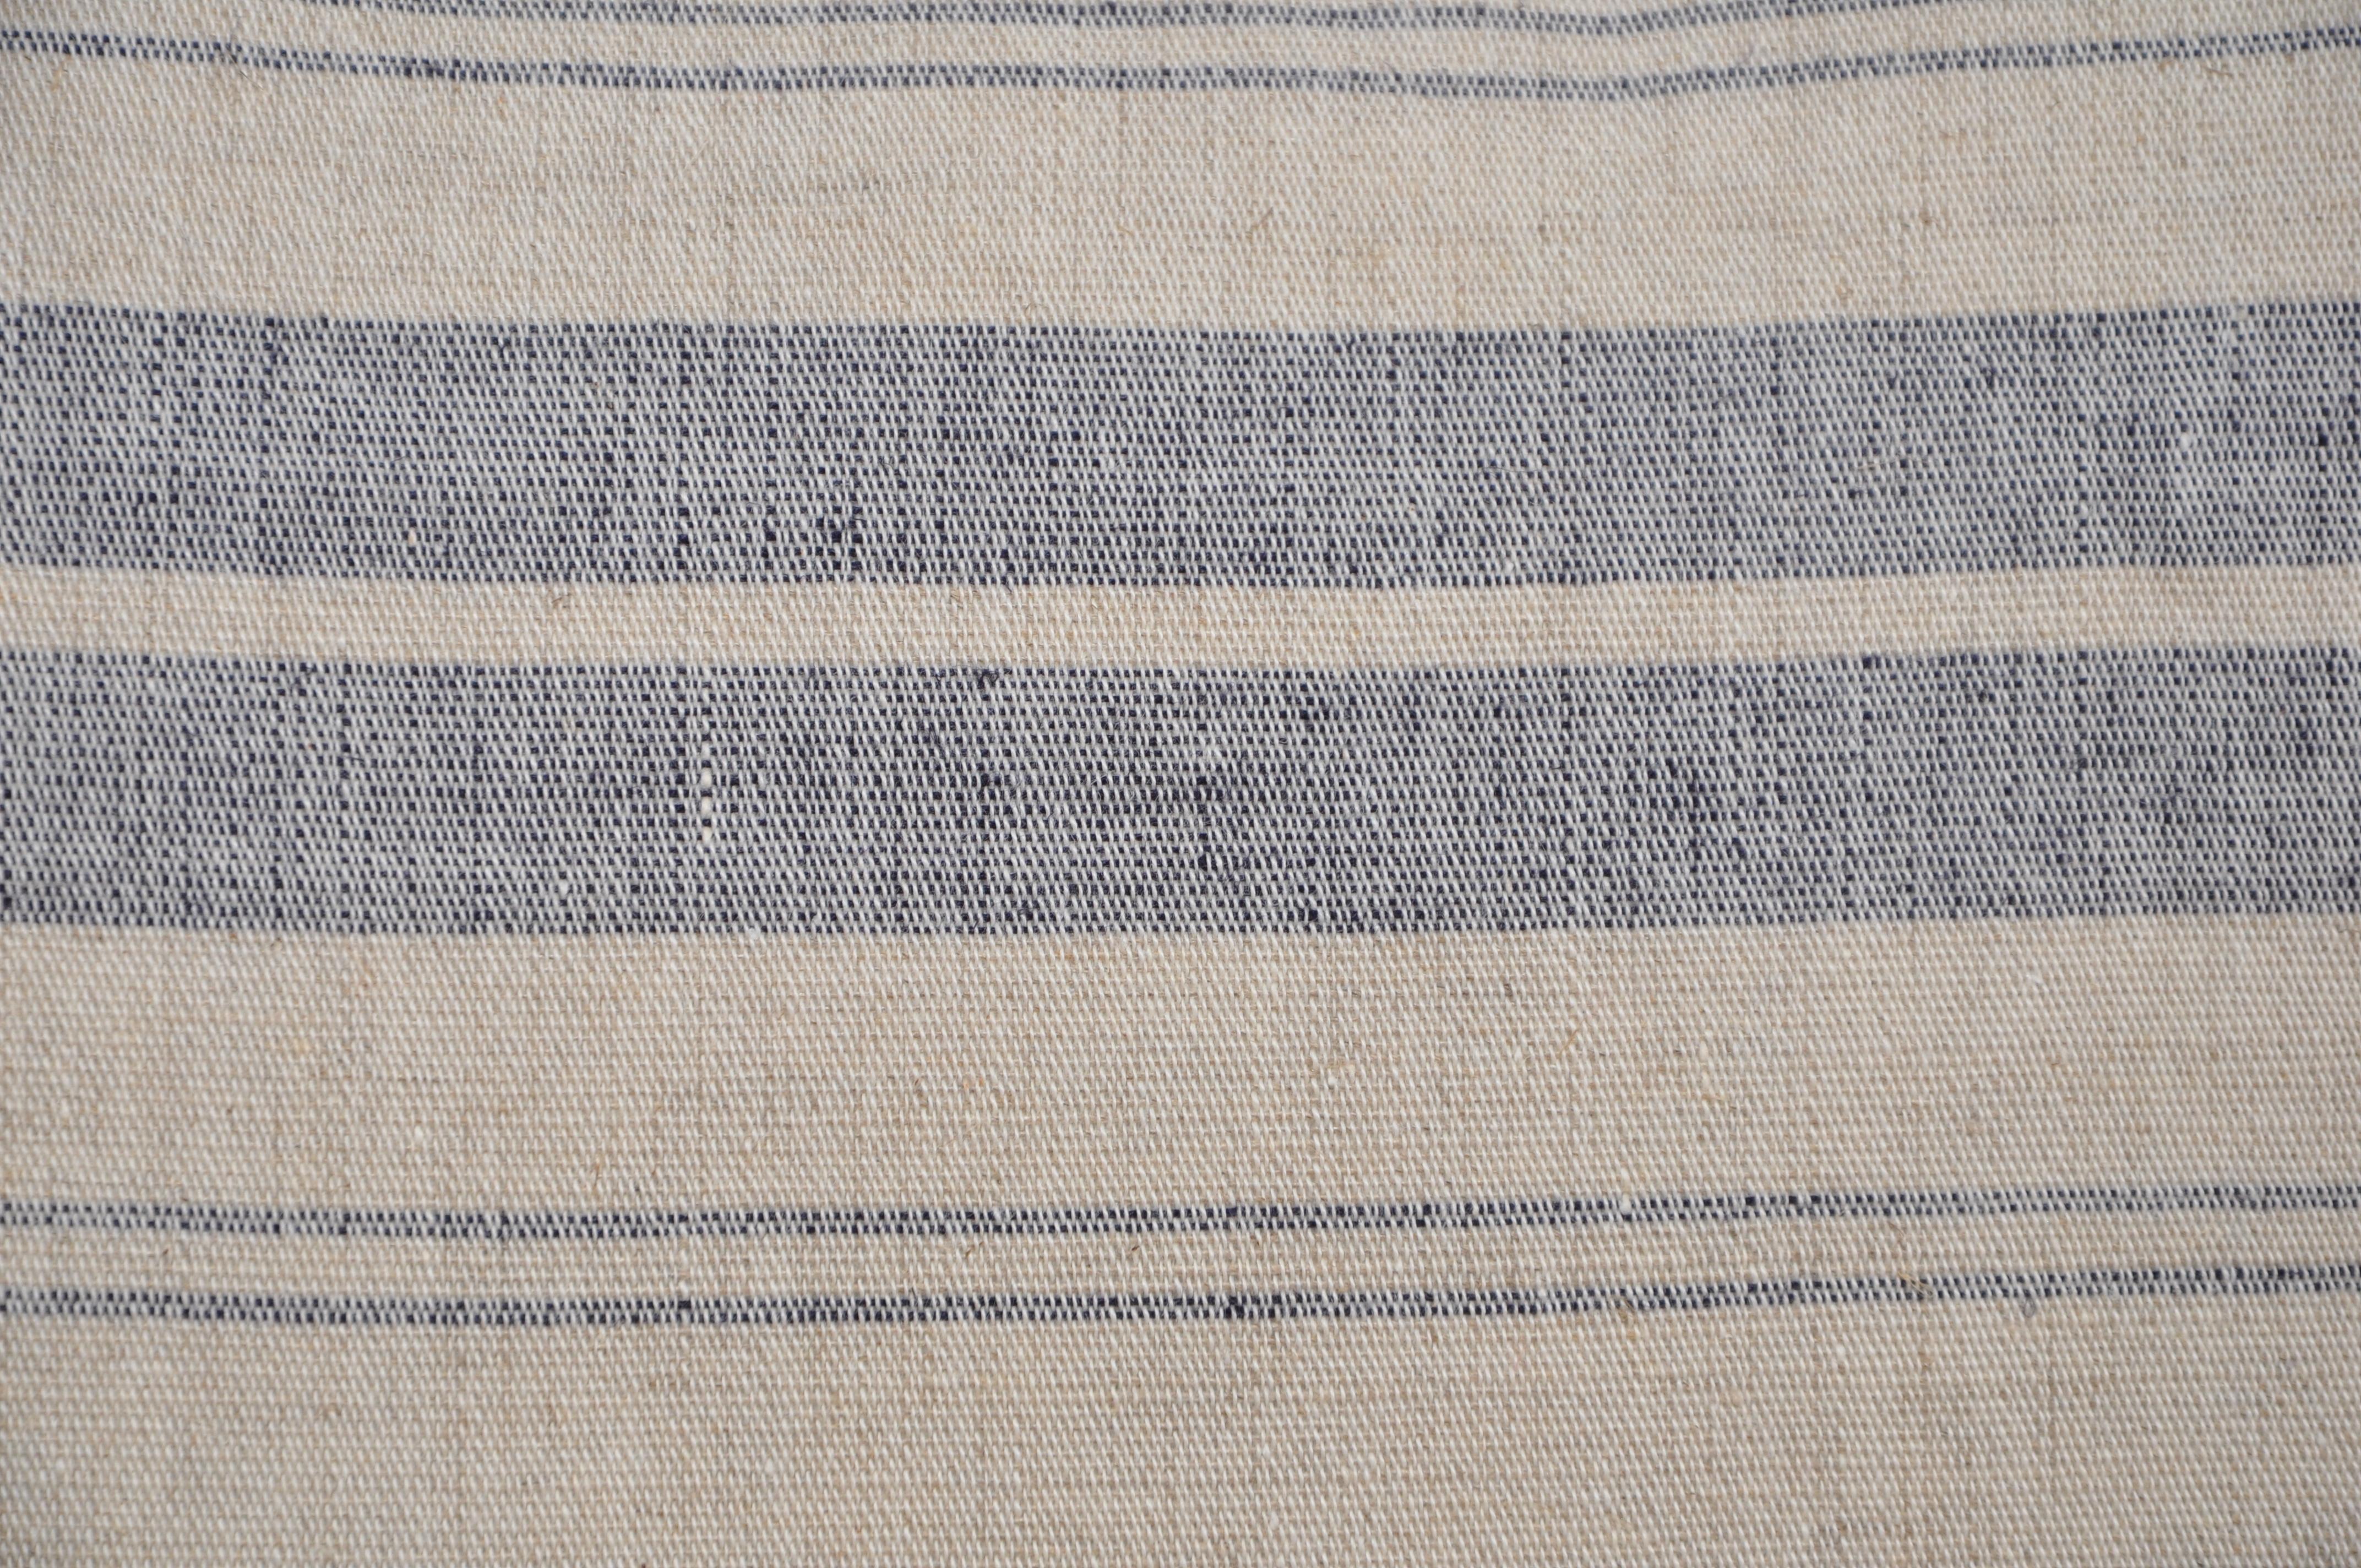 Luxury pillow created from exquisite and rare vintage Irish Linen by Irish designer Katie Larmour. 

Made from quality vintage, pure, 100% Irish Linen made from the flax plant, from an unused roll. 
Highly textured, grainy and sumptuous to touch.